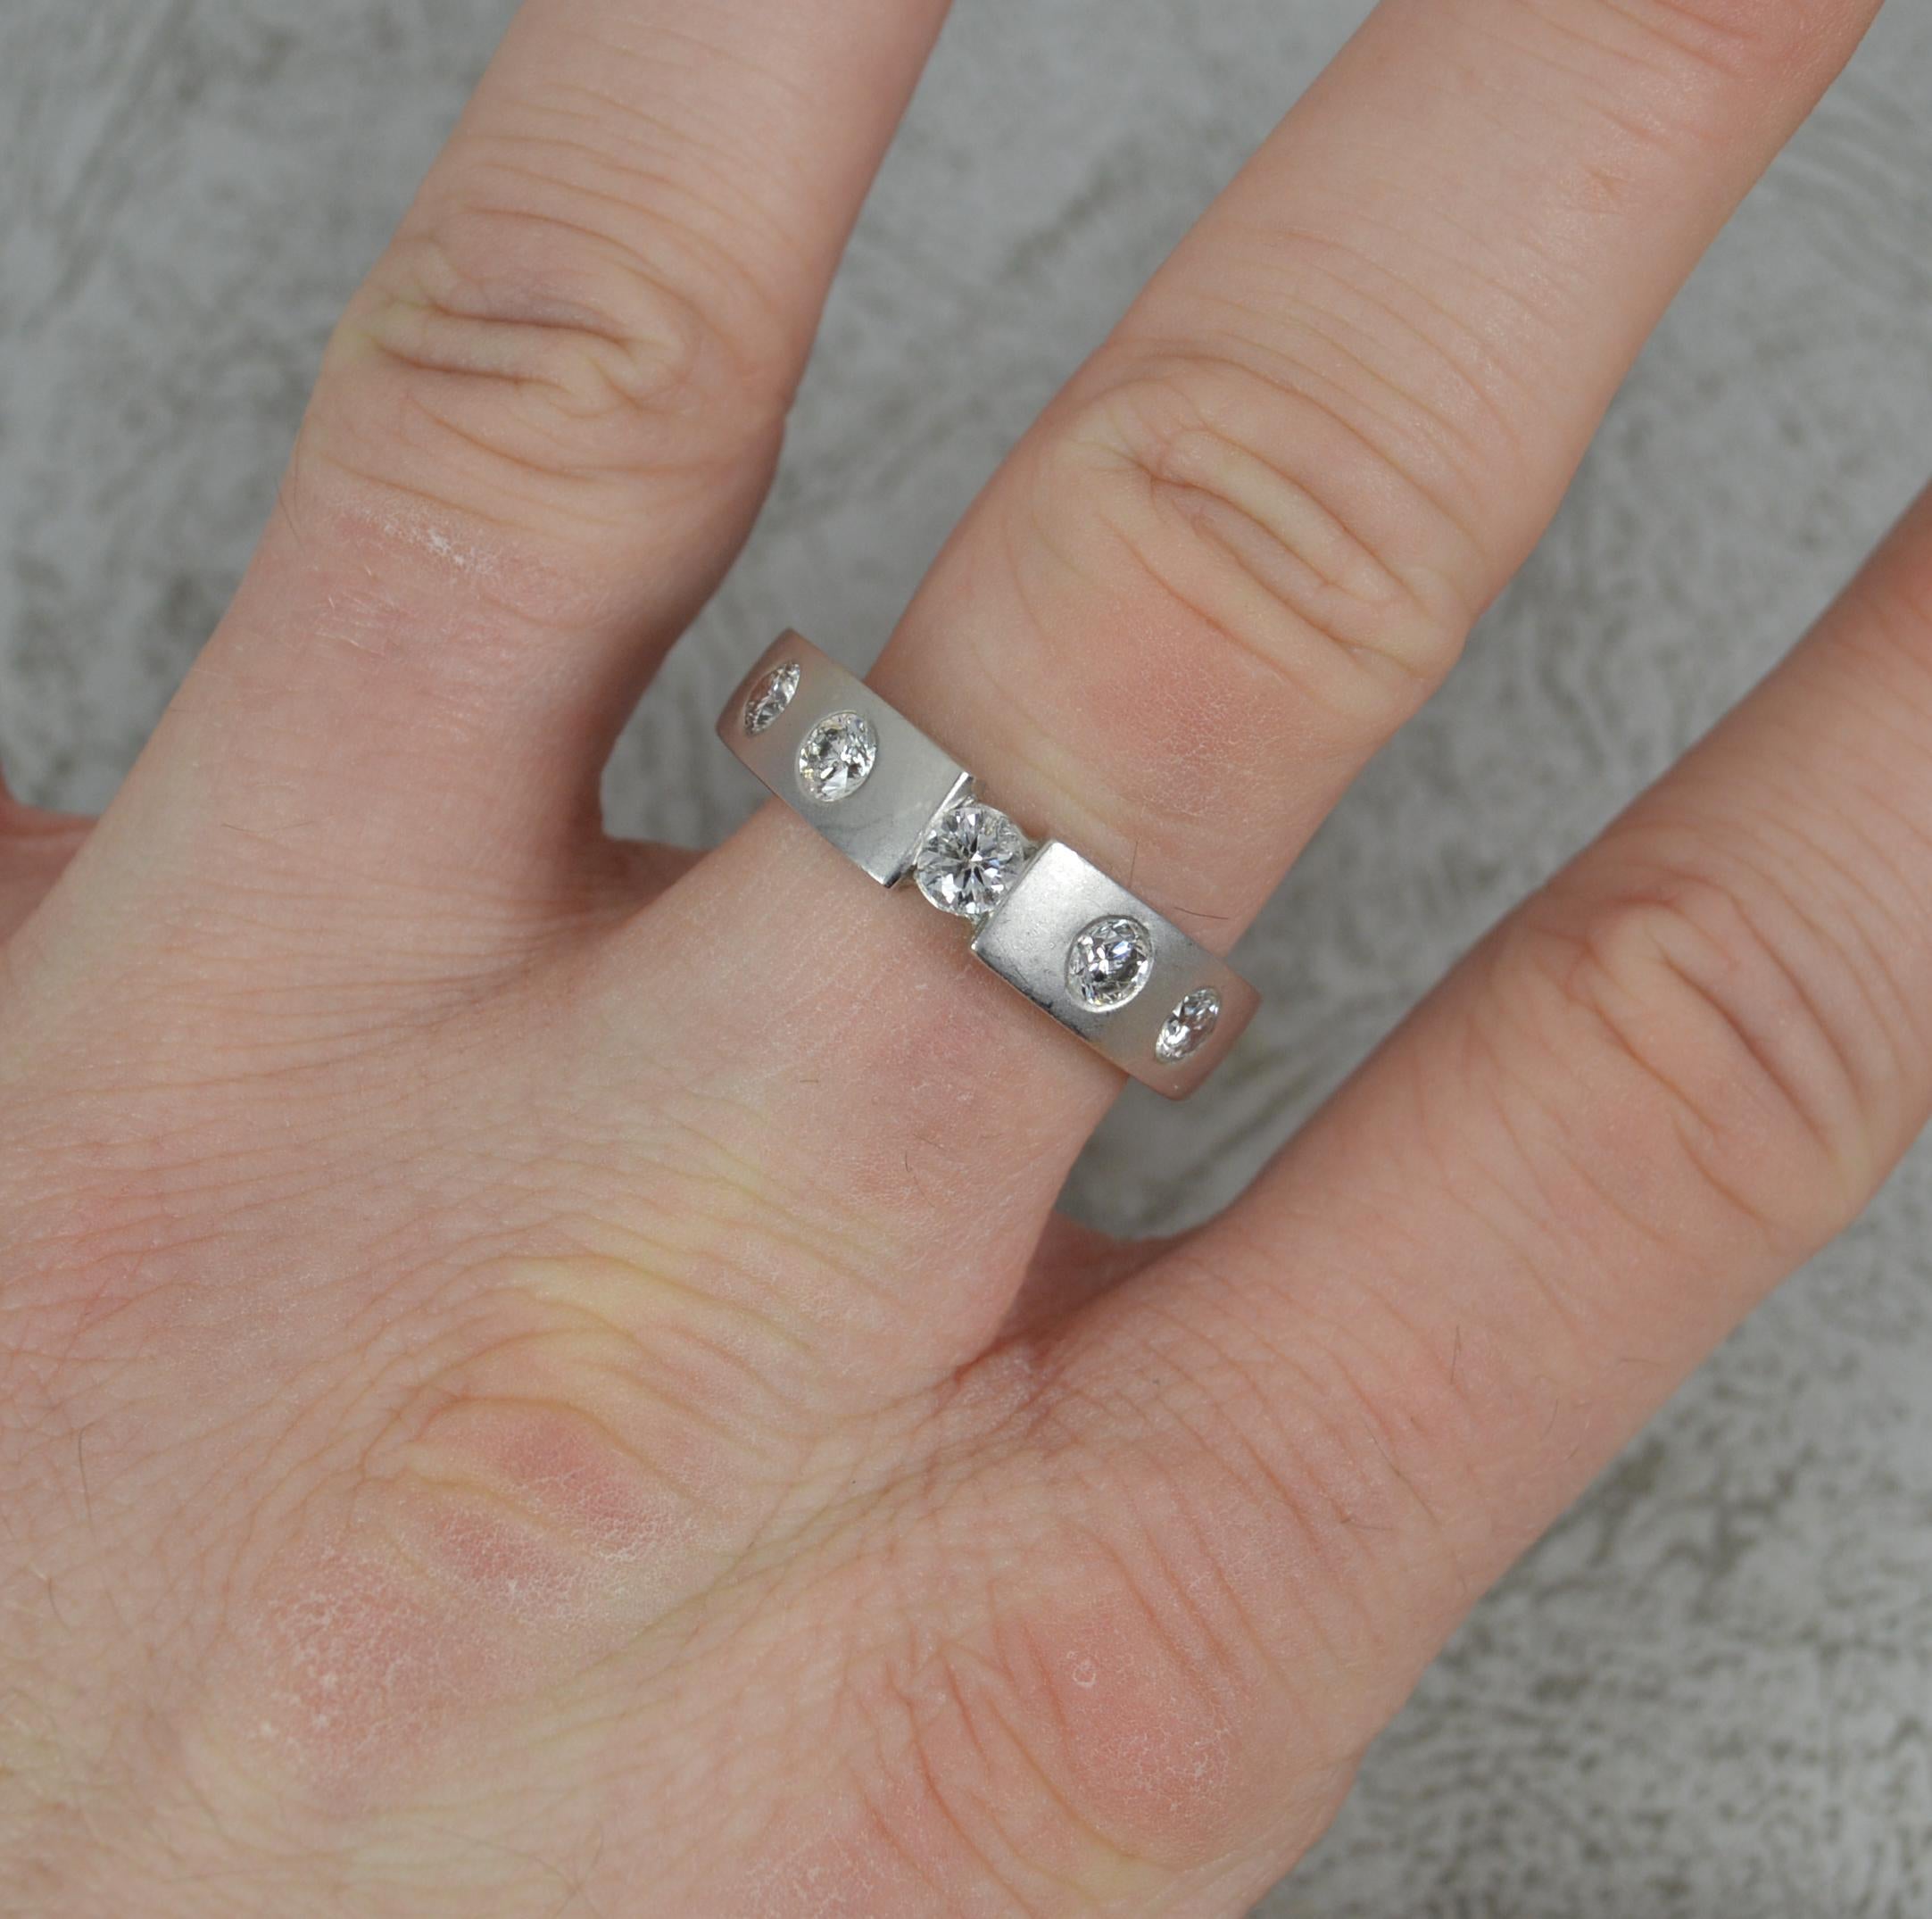 A rather impressive 18ct Gold and Diamond ring.
Solid and heavy 18 carat white gold example with a matte, non polished finish. (Can be polished to make shiny).
Set with a larger round brilliant cut diamond to centre in tension setting with a further